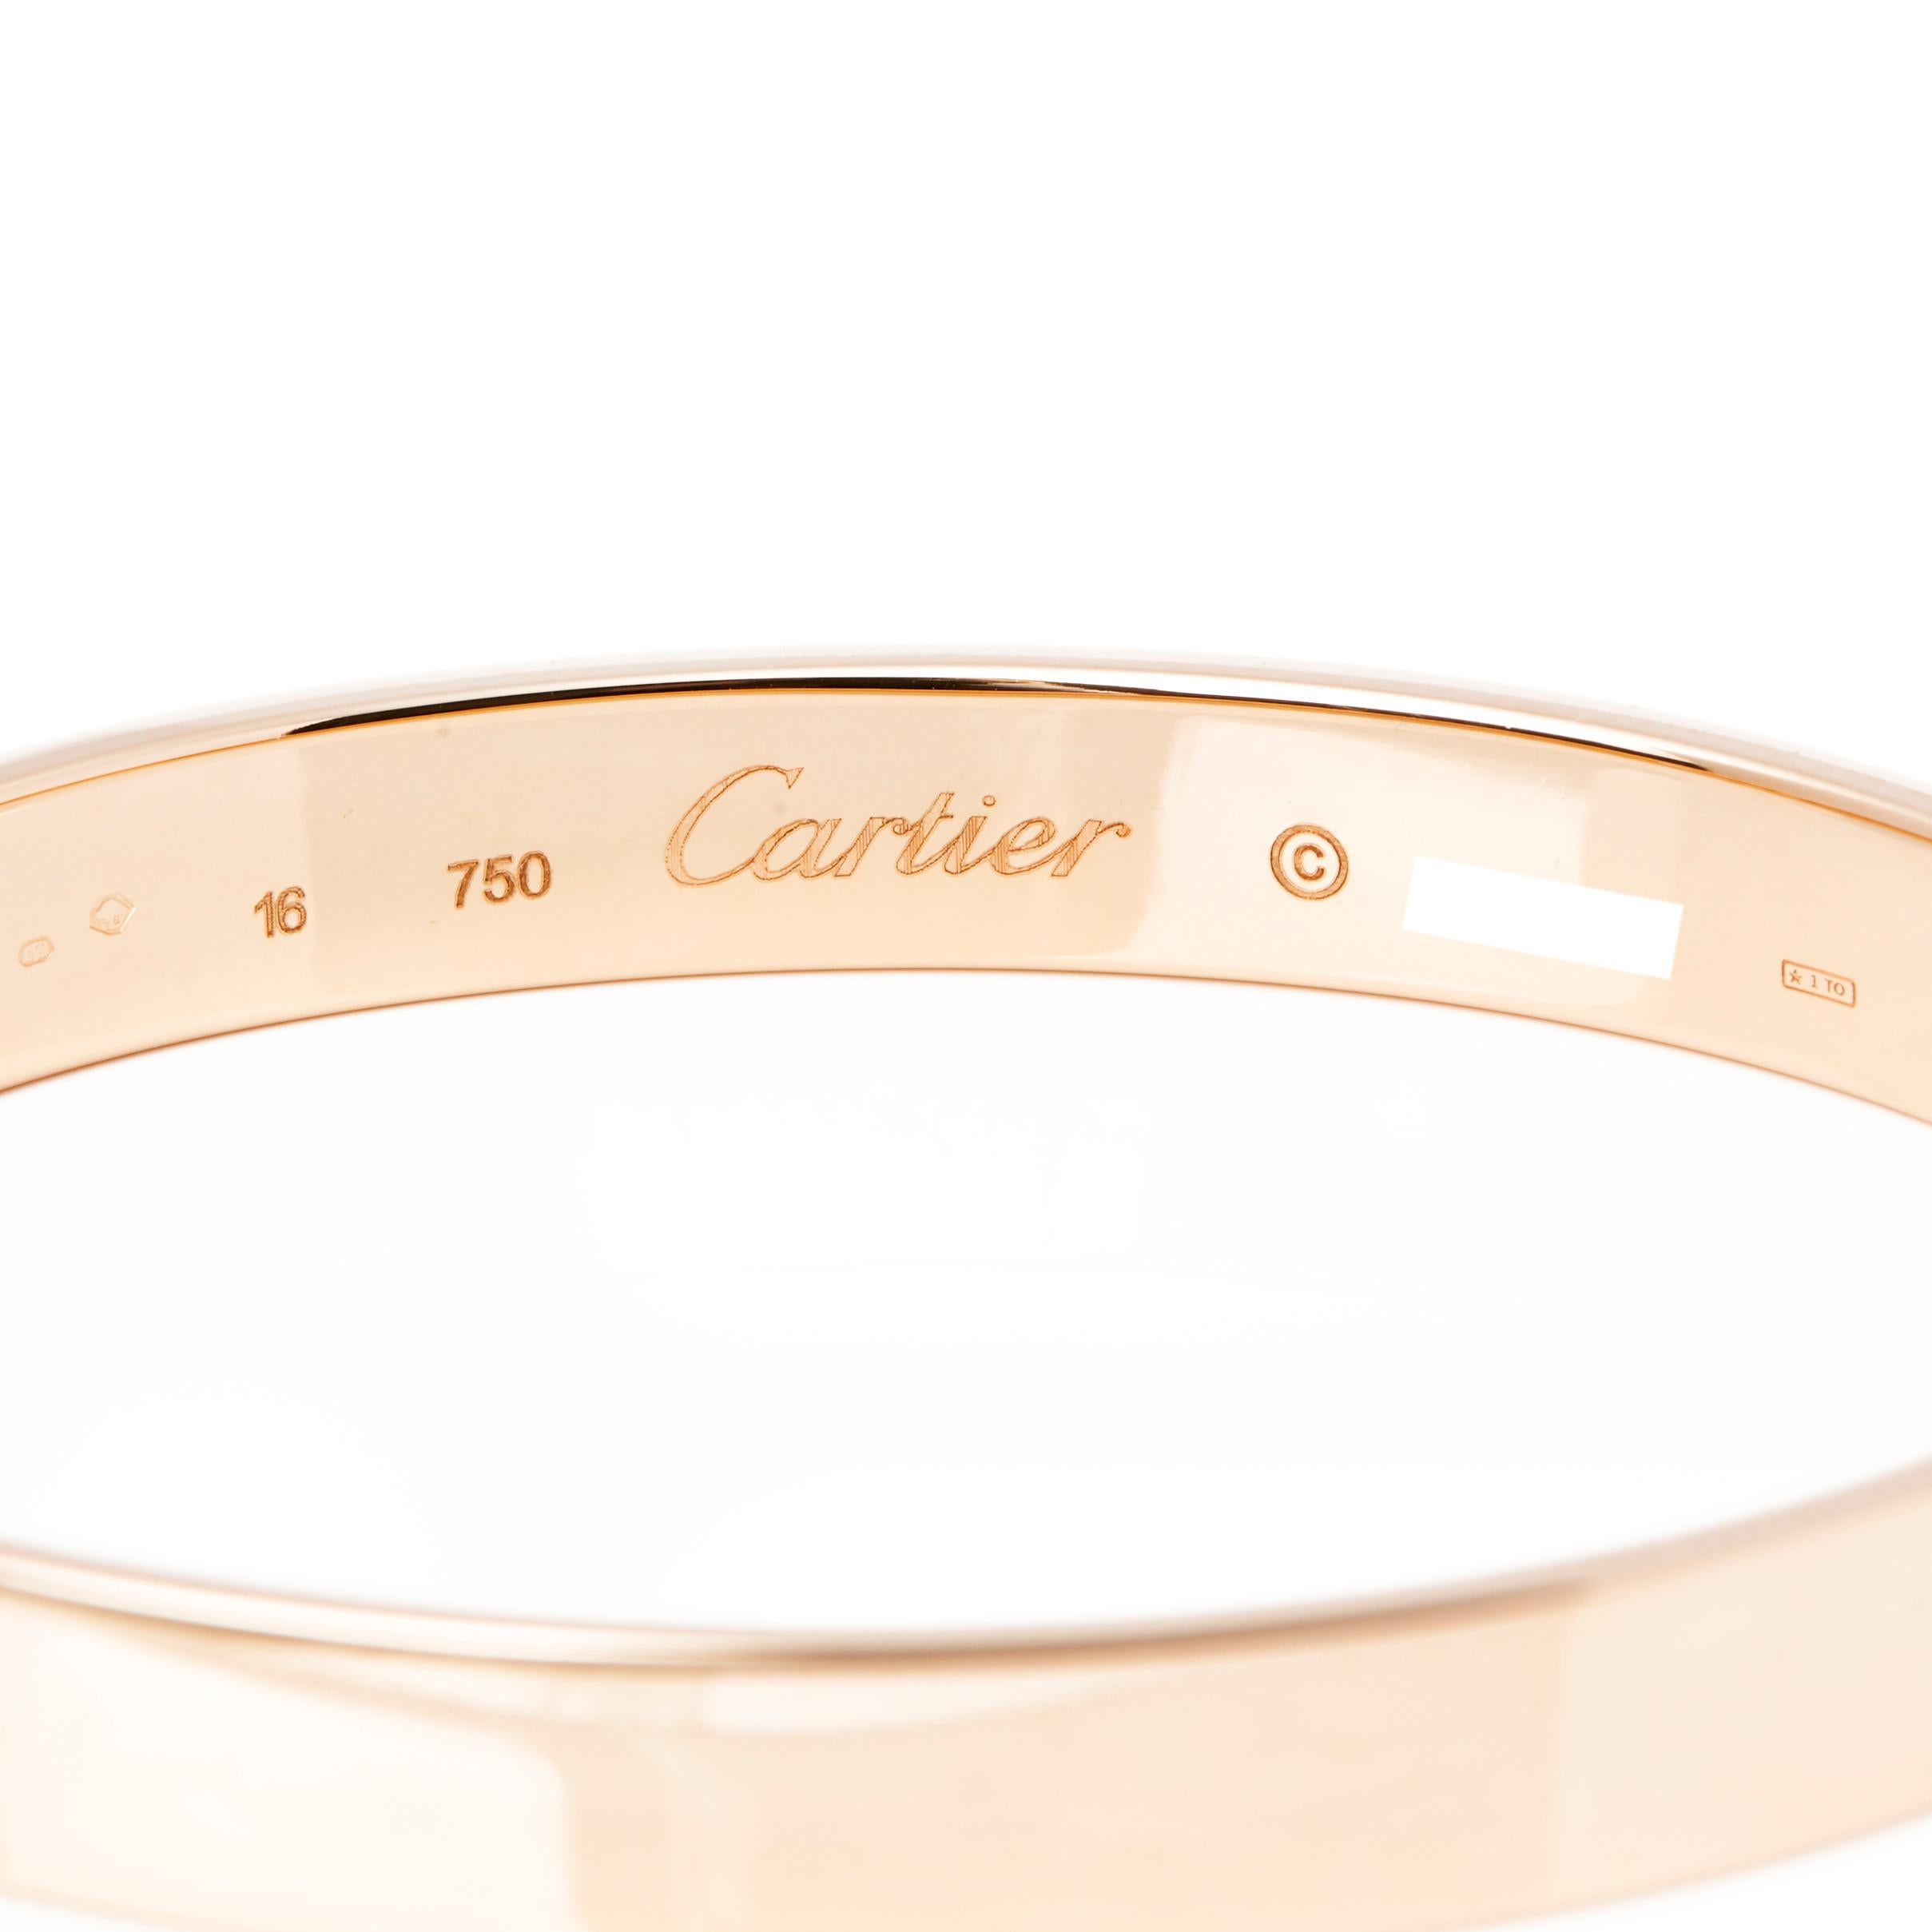 This Anniversary bracelet by Cartier features one round brilliant cut diamond mounted in an 18ct yellow gold bangle. The bracelet has a secure push button clasp. Complete with Xupes presentation box. Our Xupes reference is COMJ474 should you need to